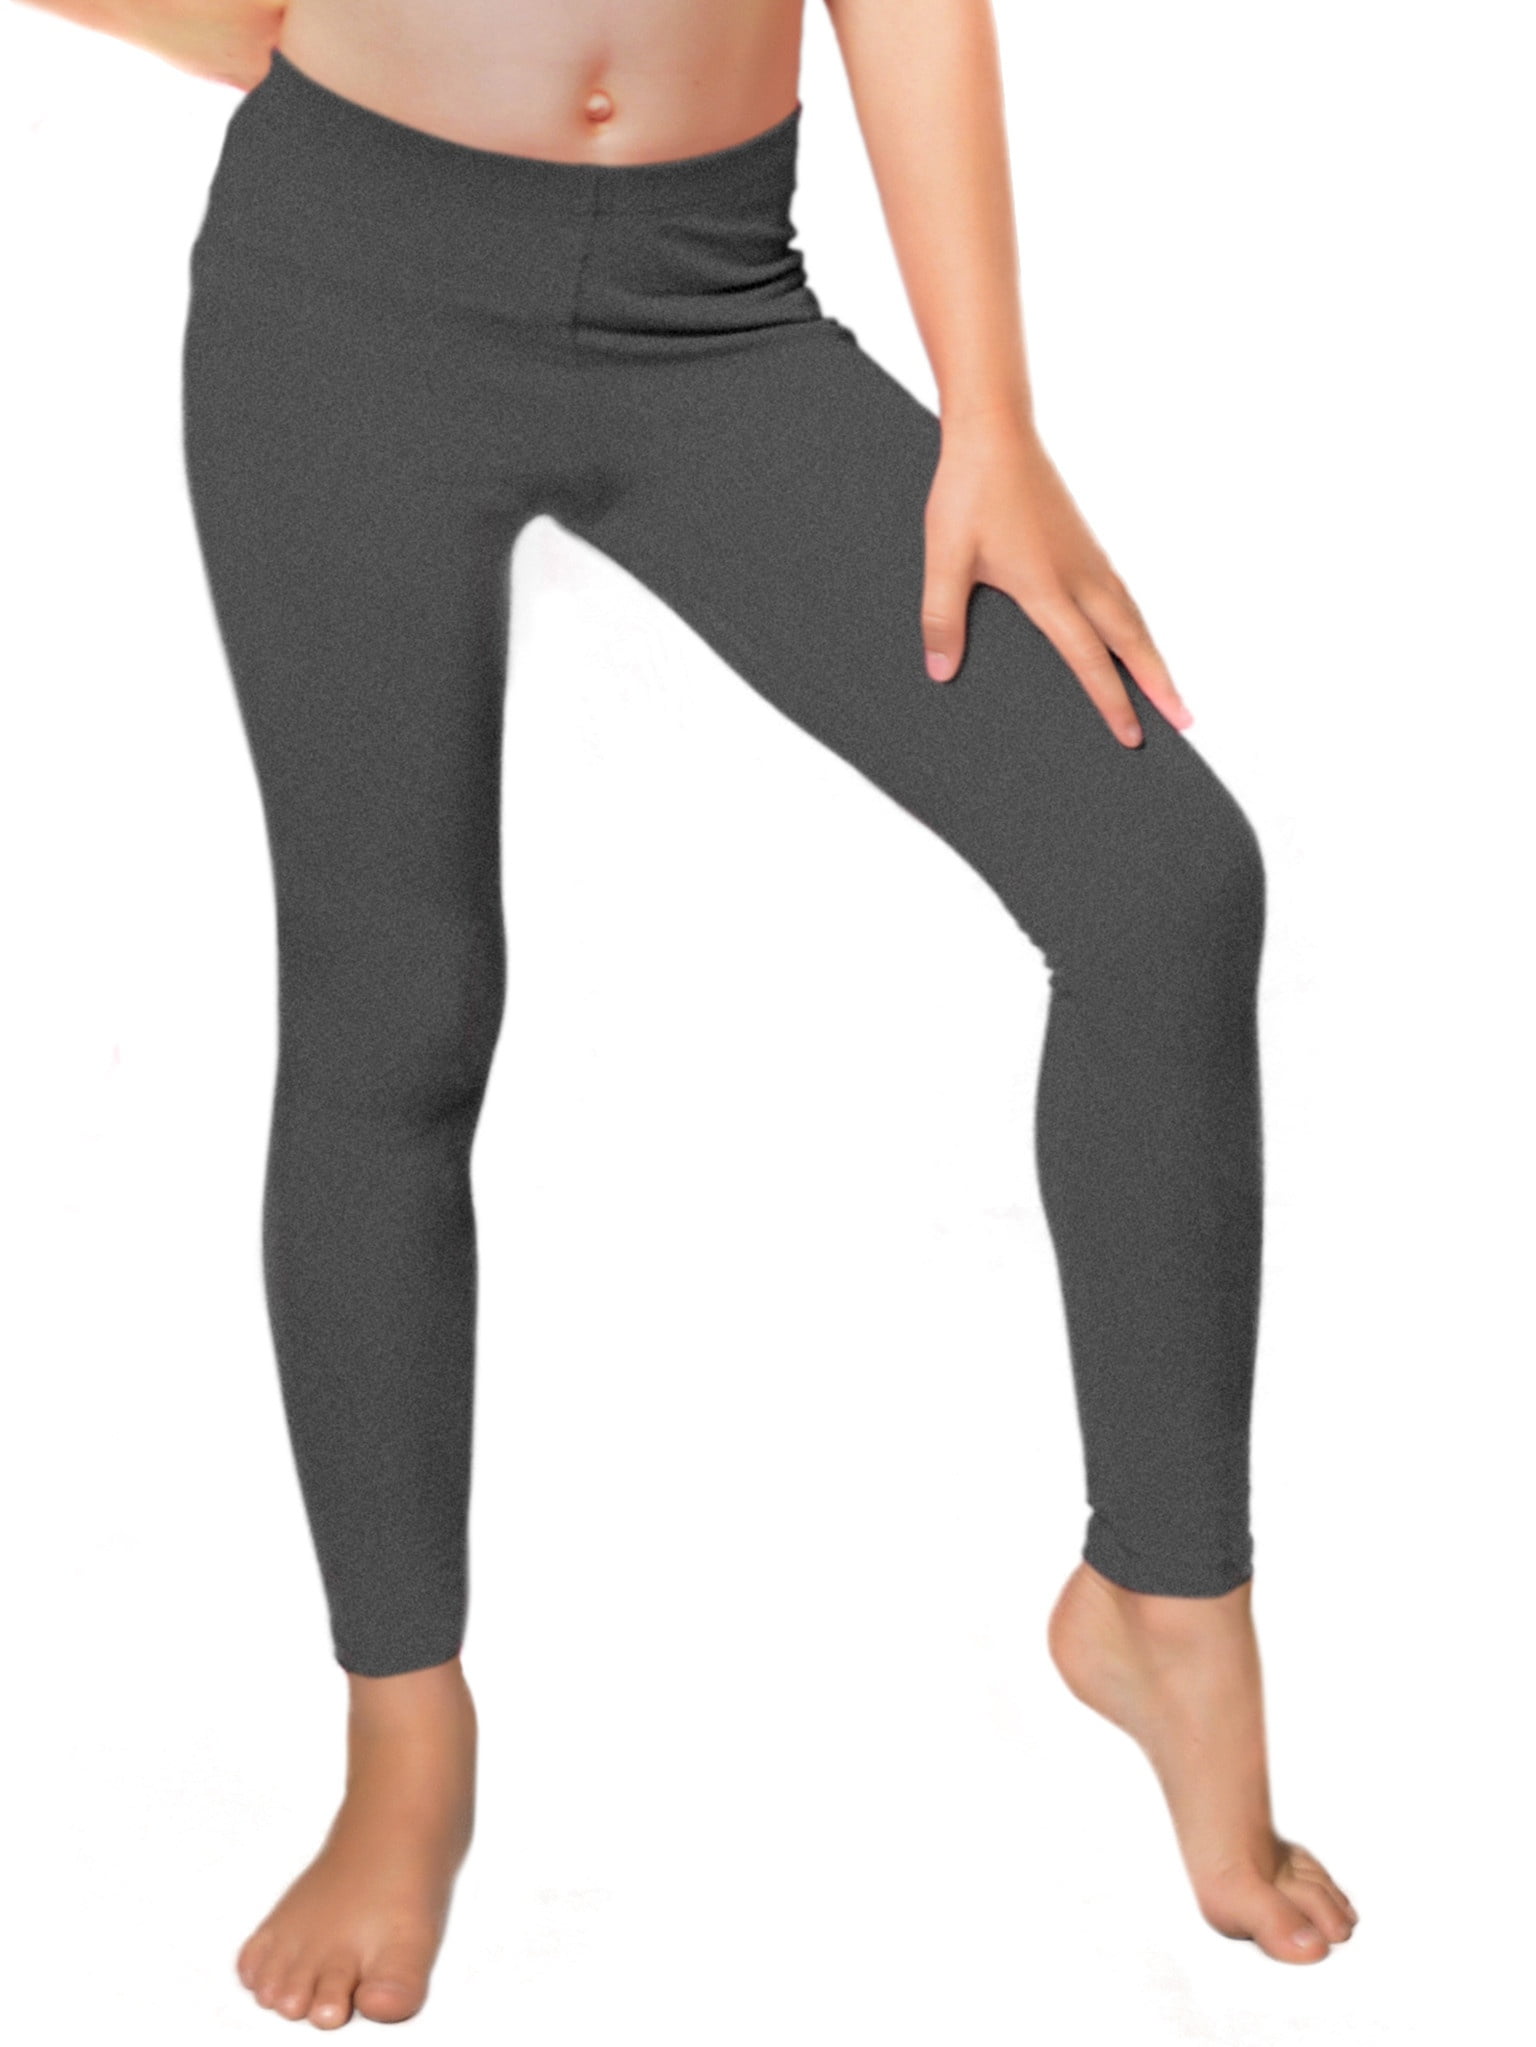 Stretch Is Comfort - Girl's and Women's Premium Footless Leggings ...